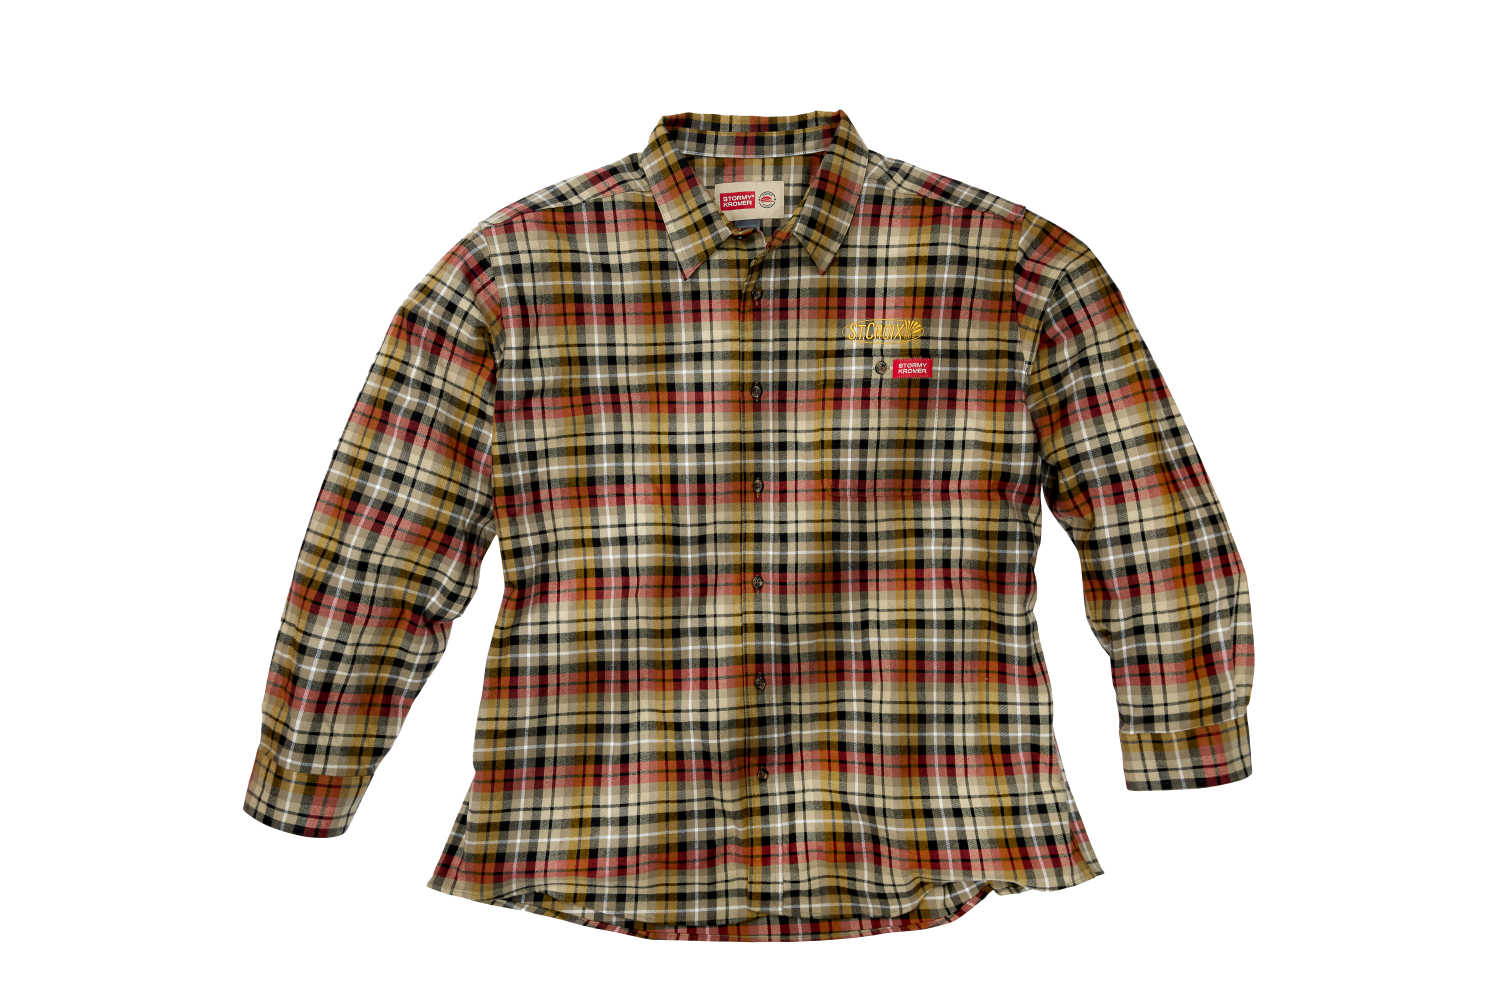 St. Croix Stormy Kromer Limited Edition Flannel